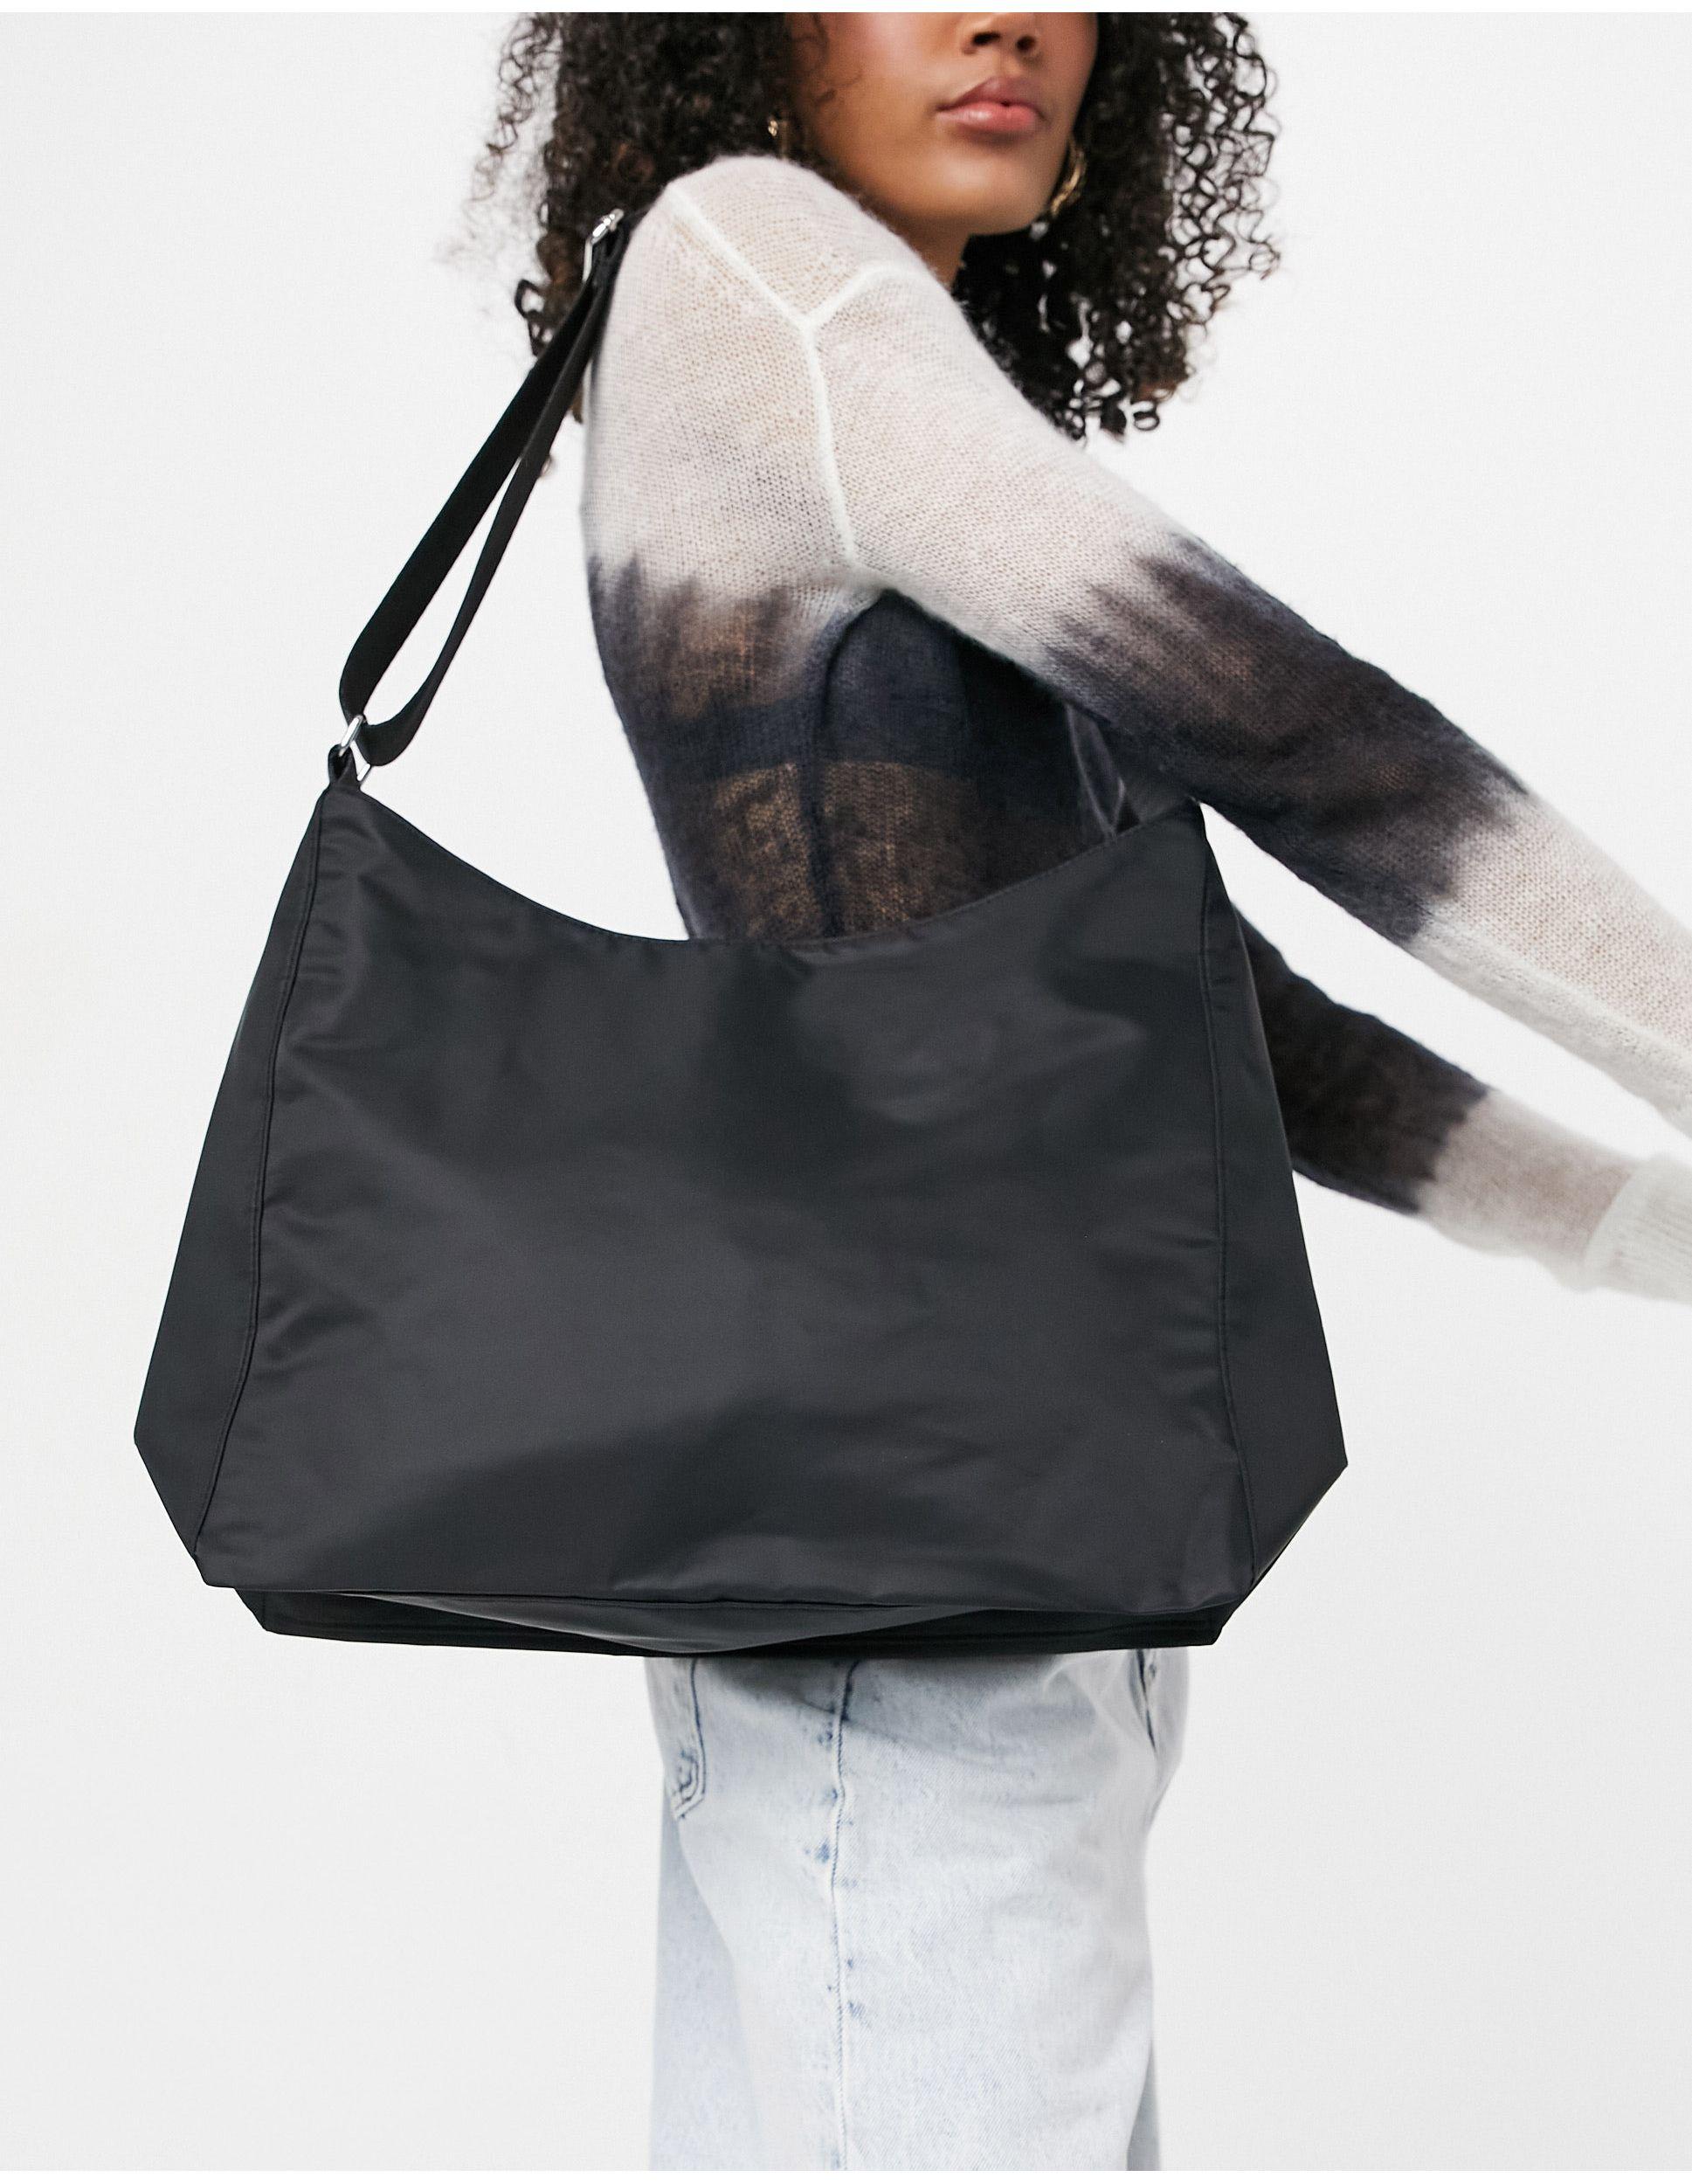 Weekday Carry Recycled Shoulder Bag in Black - Lyst